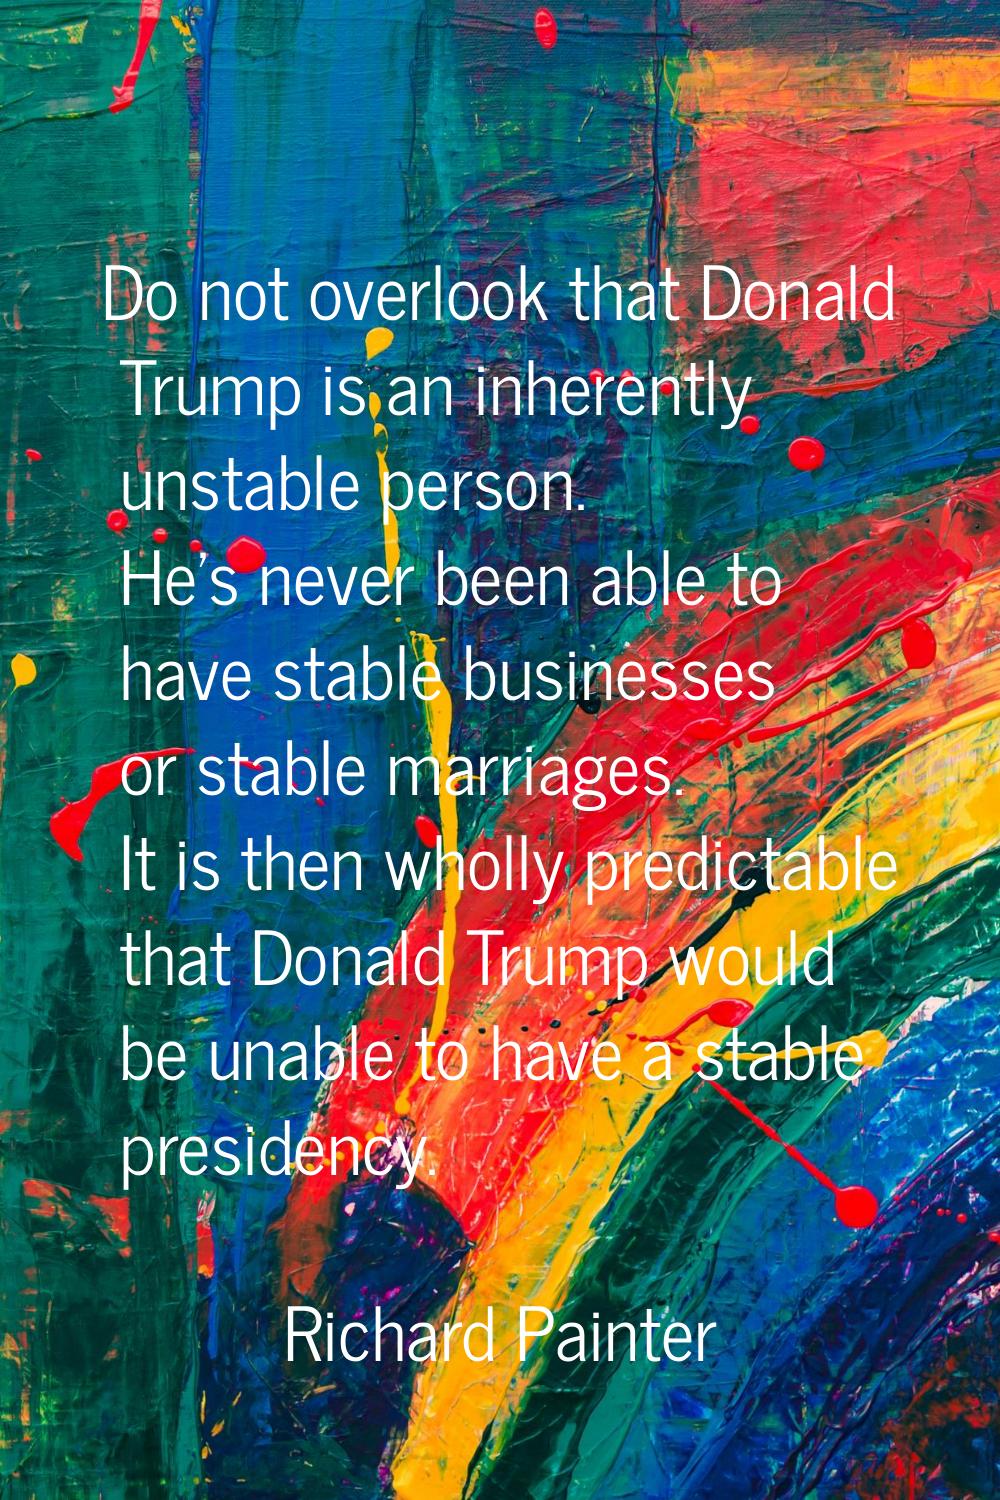 Do not overlook that Donald Trump is an inherently unstable person. He's never been able to have st